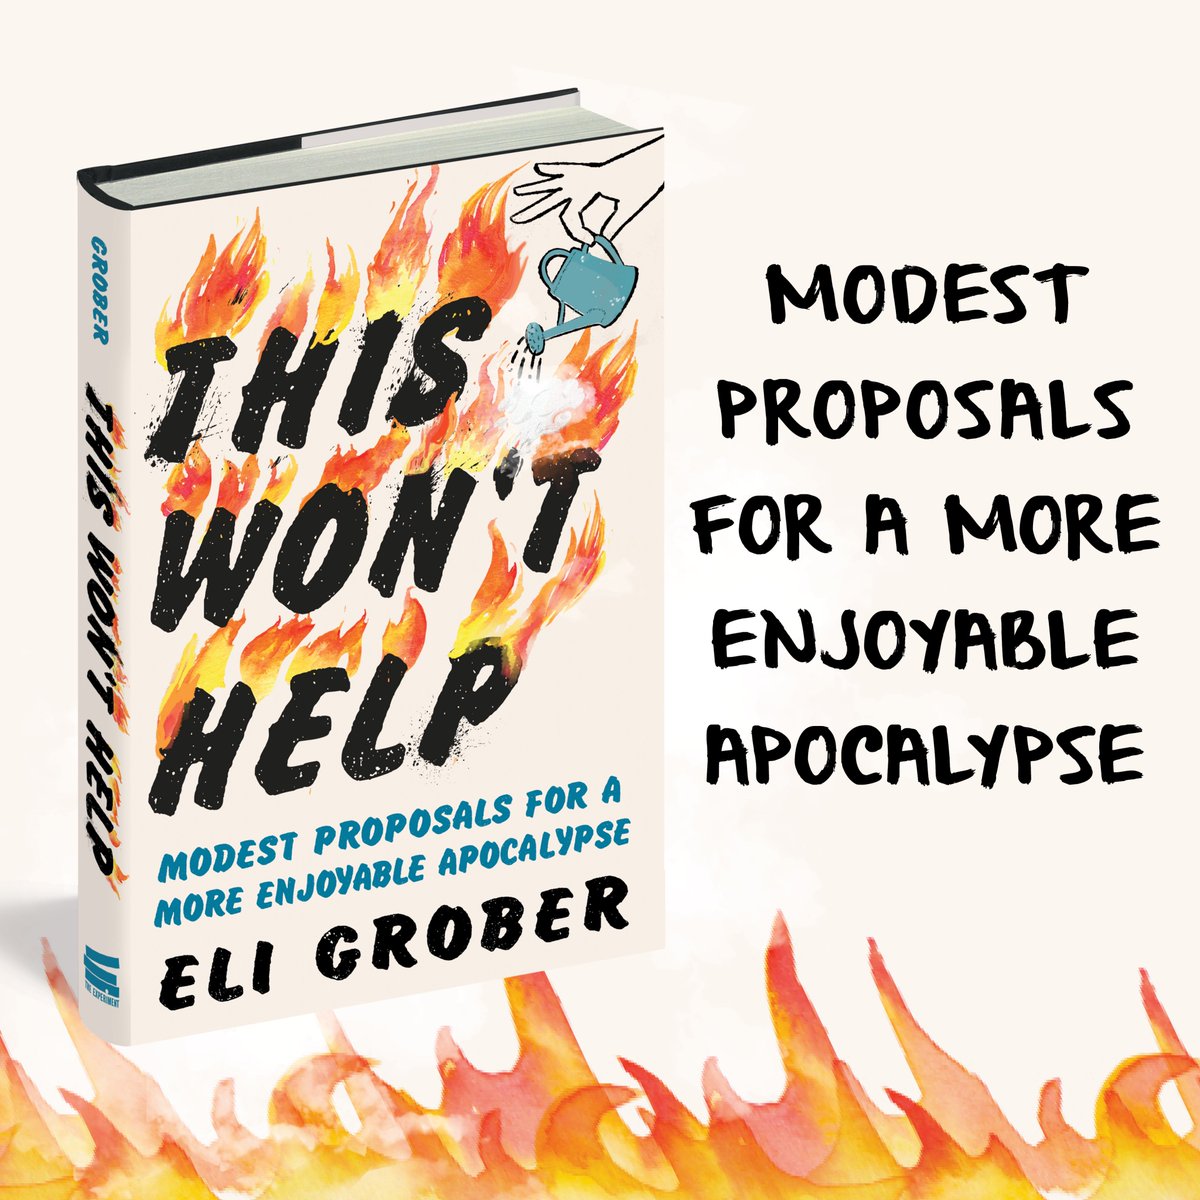 Check out @mcsweeneys for an early preview of @eligrober's This Won't Help, a collection of witty observations from a world that’s falling apart, publishing Oct. 24 and available now for preorder. 🔥 bit.ly/ThisWontHelpPr… #bookrecommendation #nonfiction #preorder #humor #read